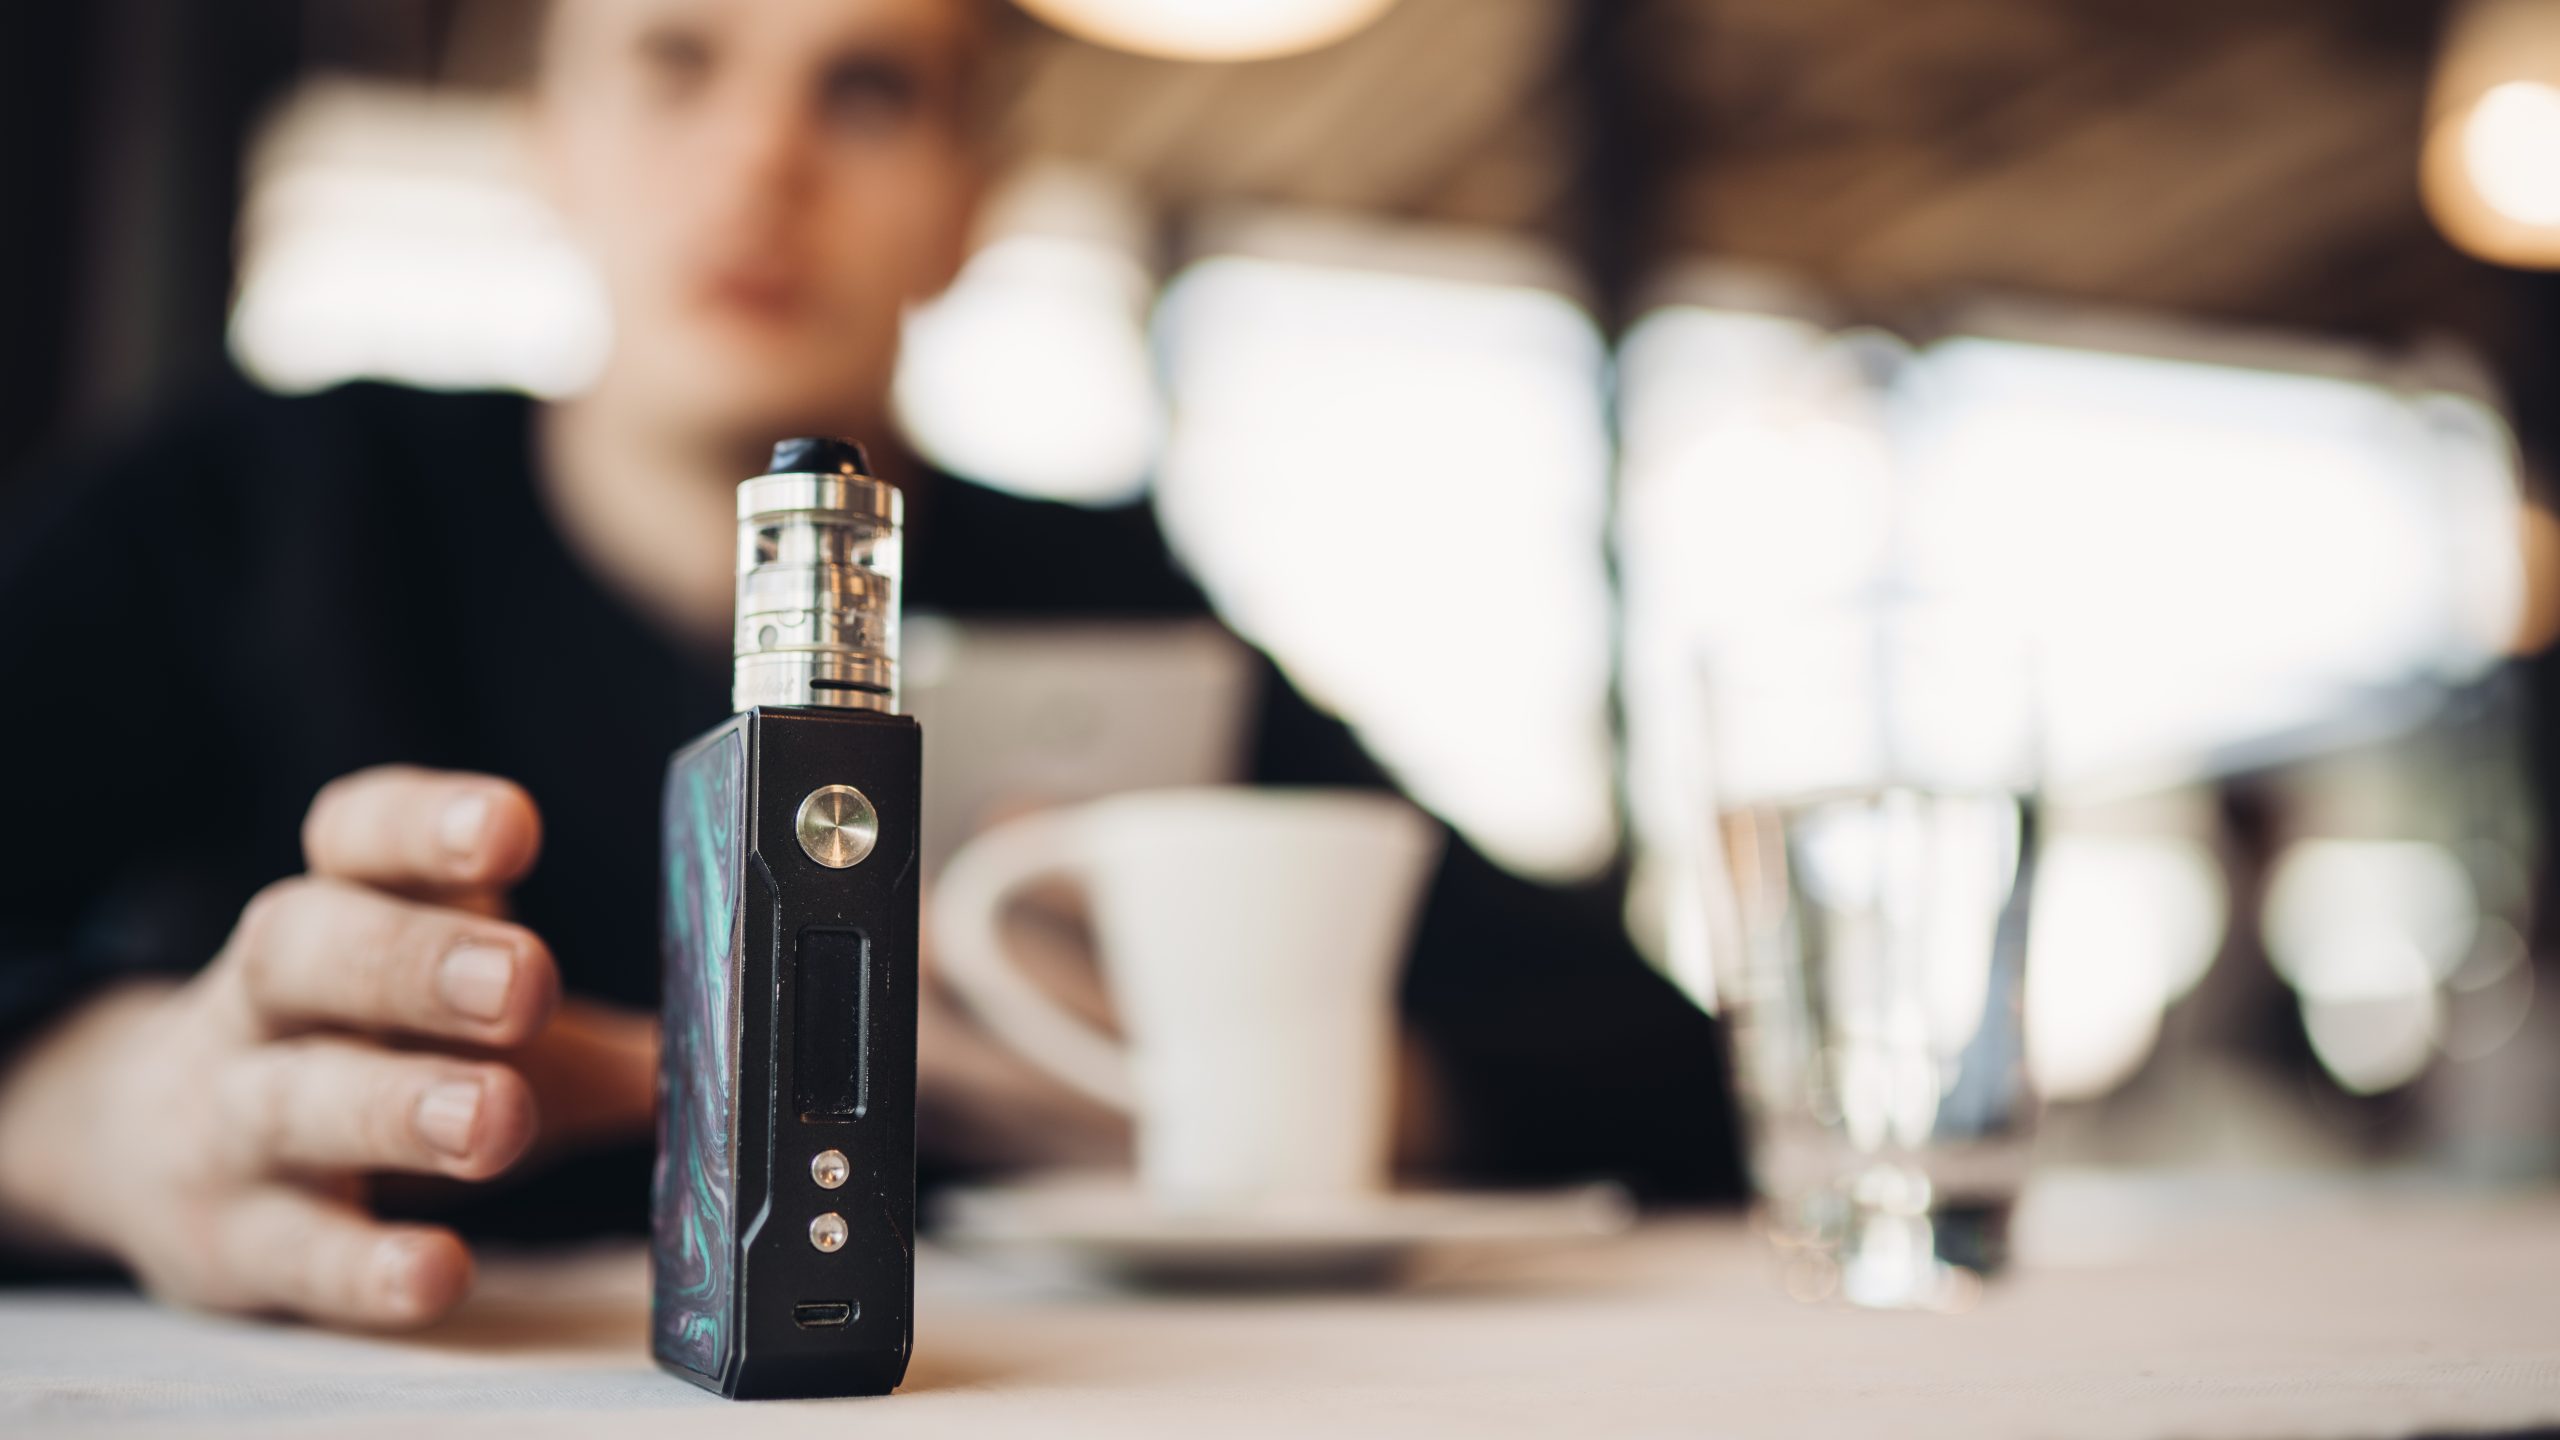 Imperial Brands responds to UK Government call for evidence on youth vaping